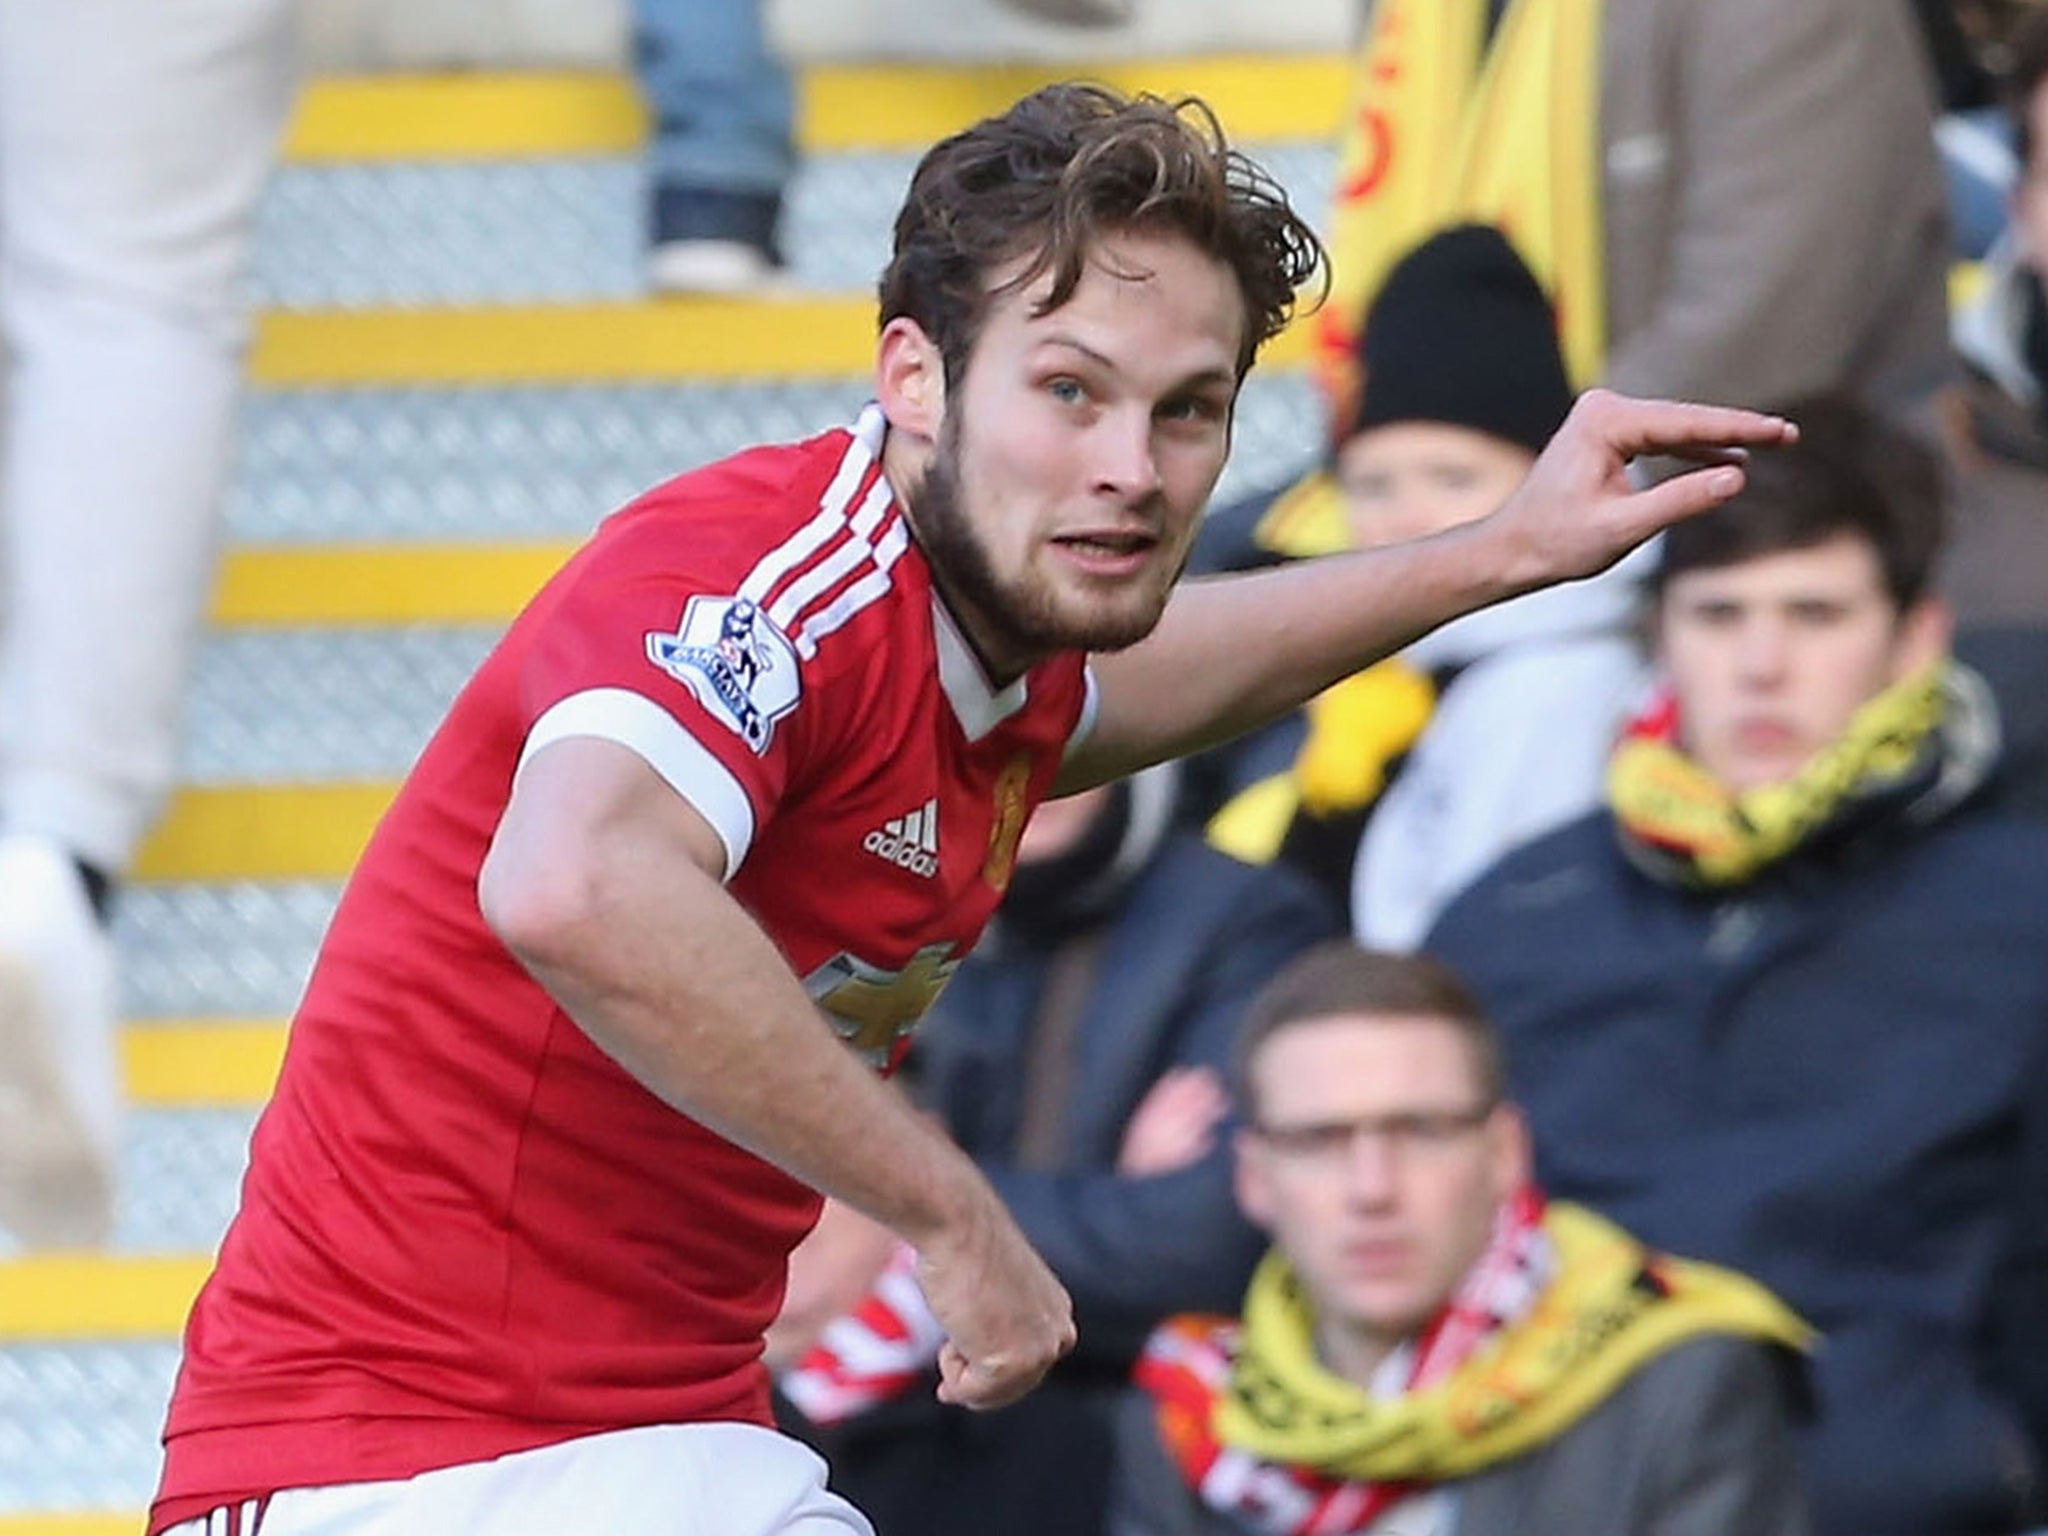 Daley Blind in action against Watford